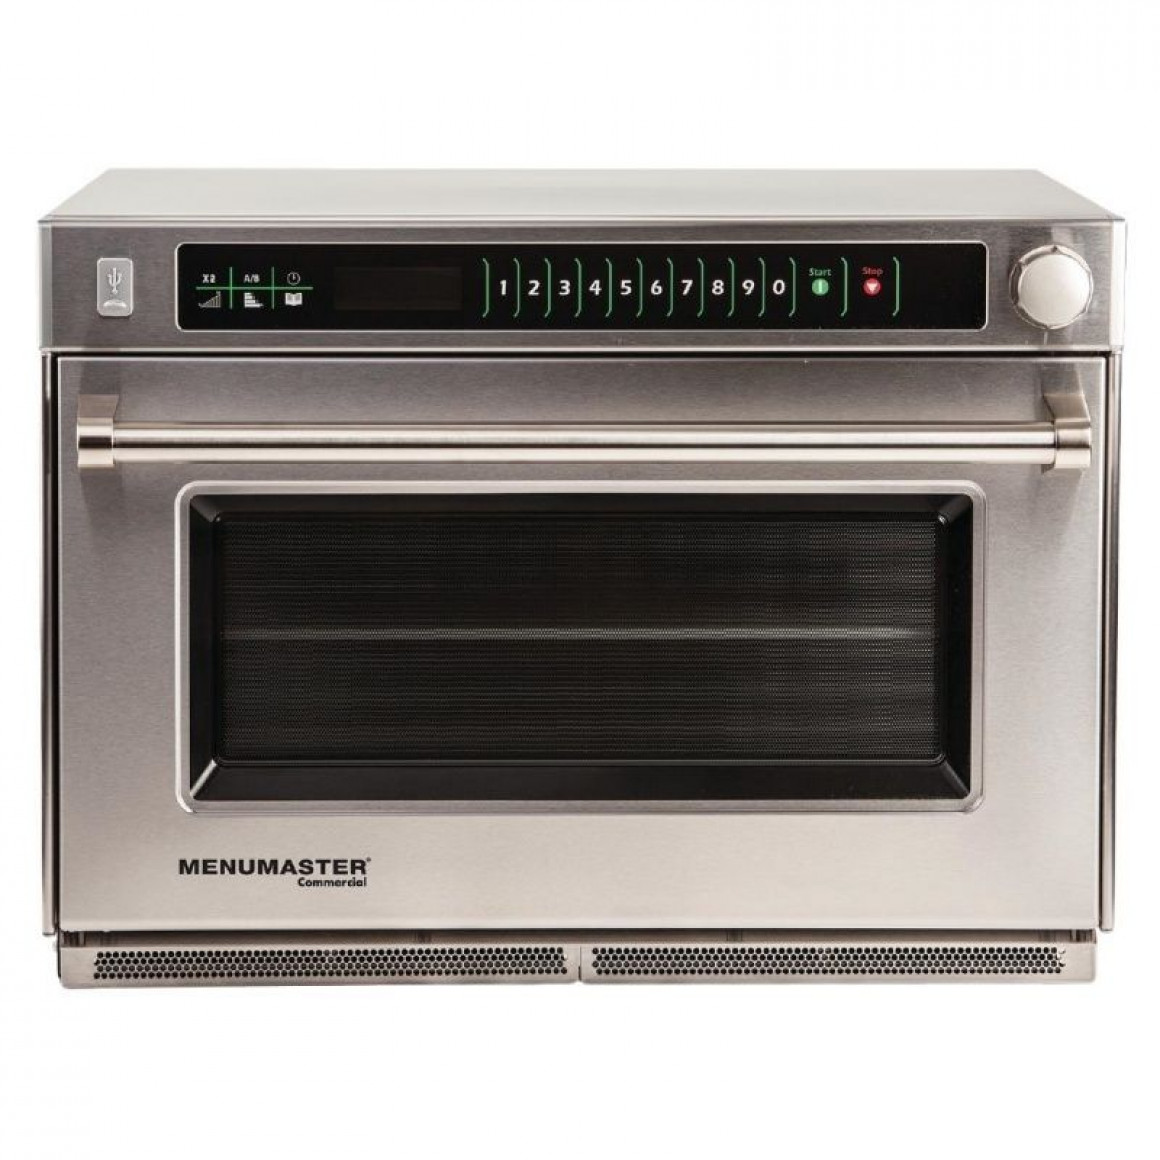 Microwave oven Steam